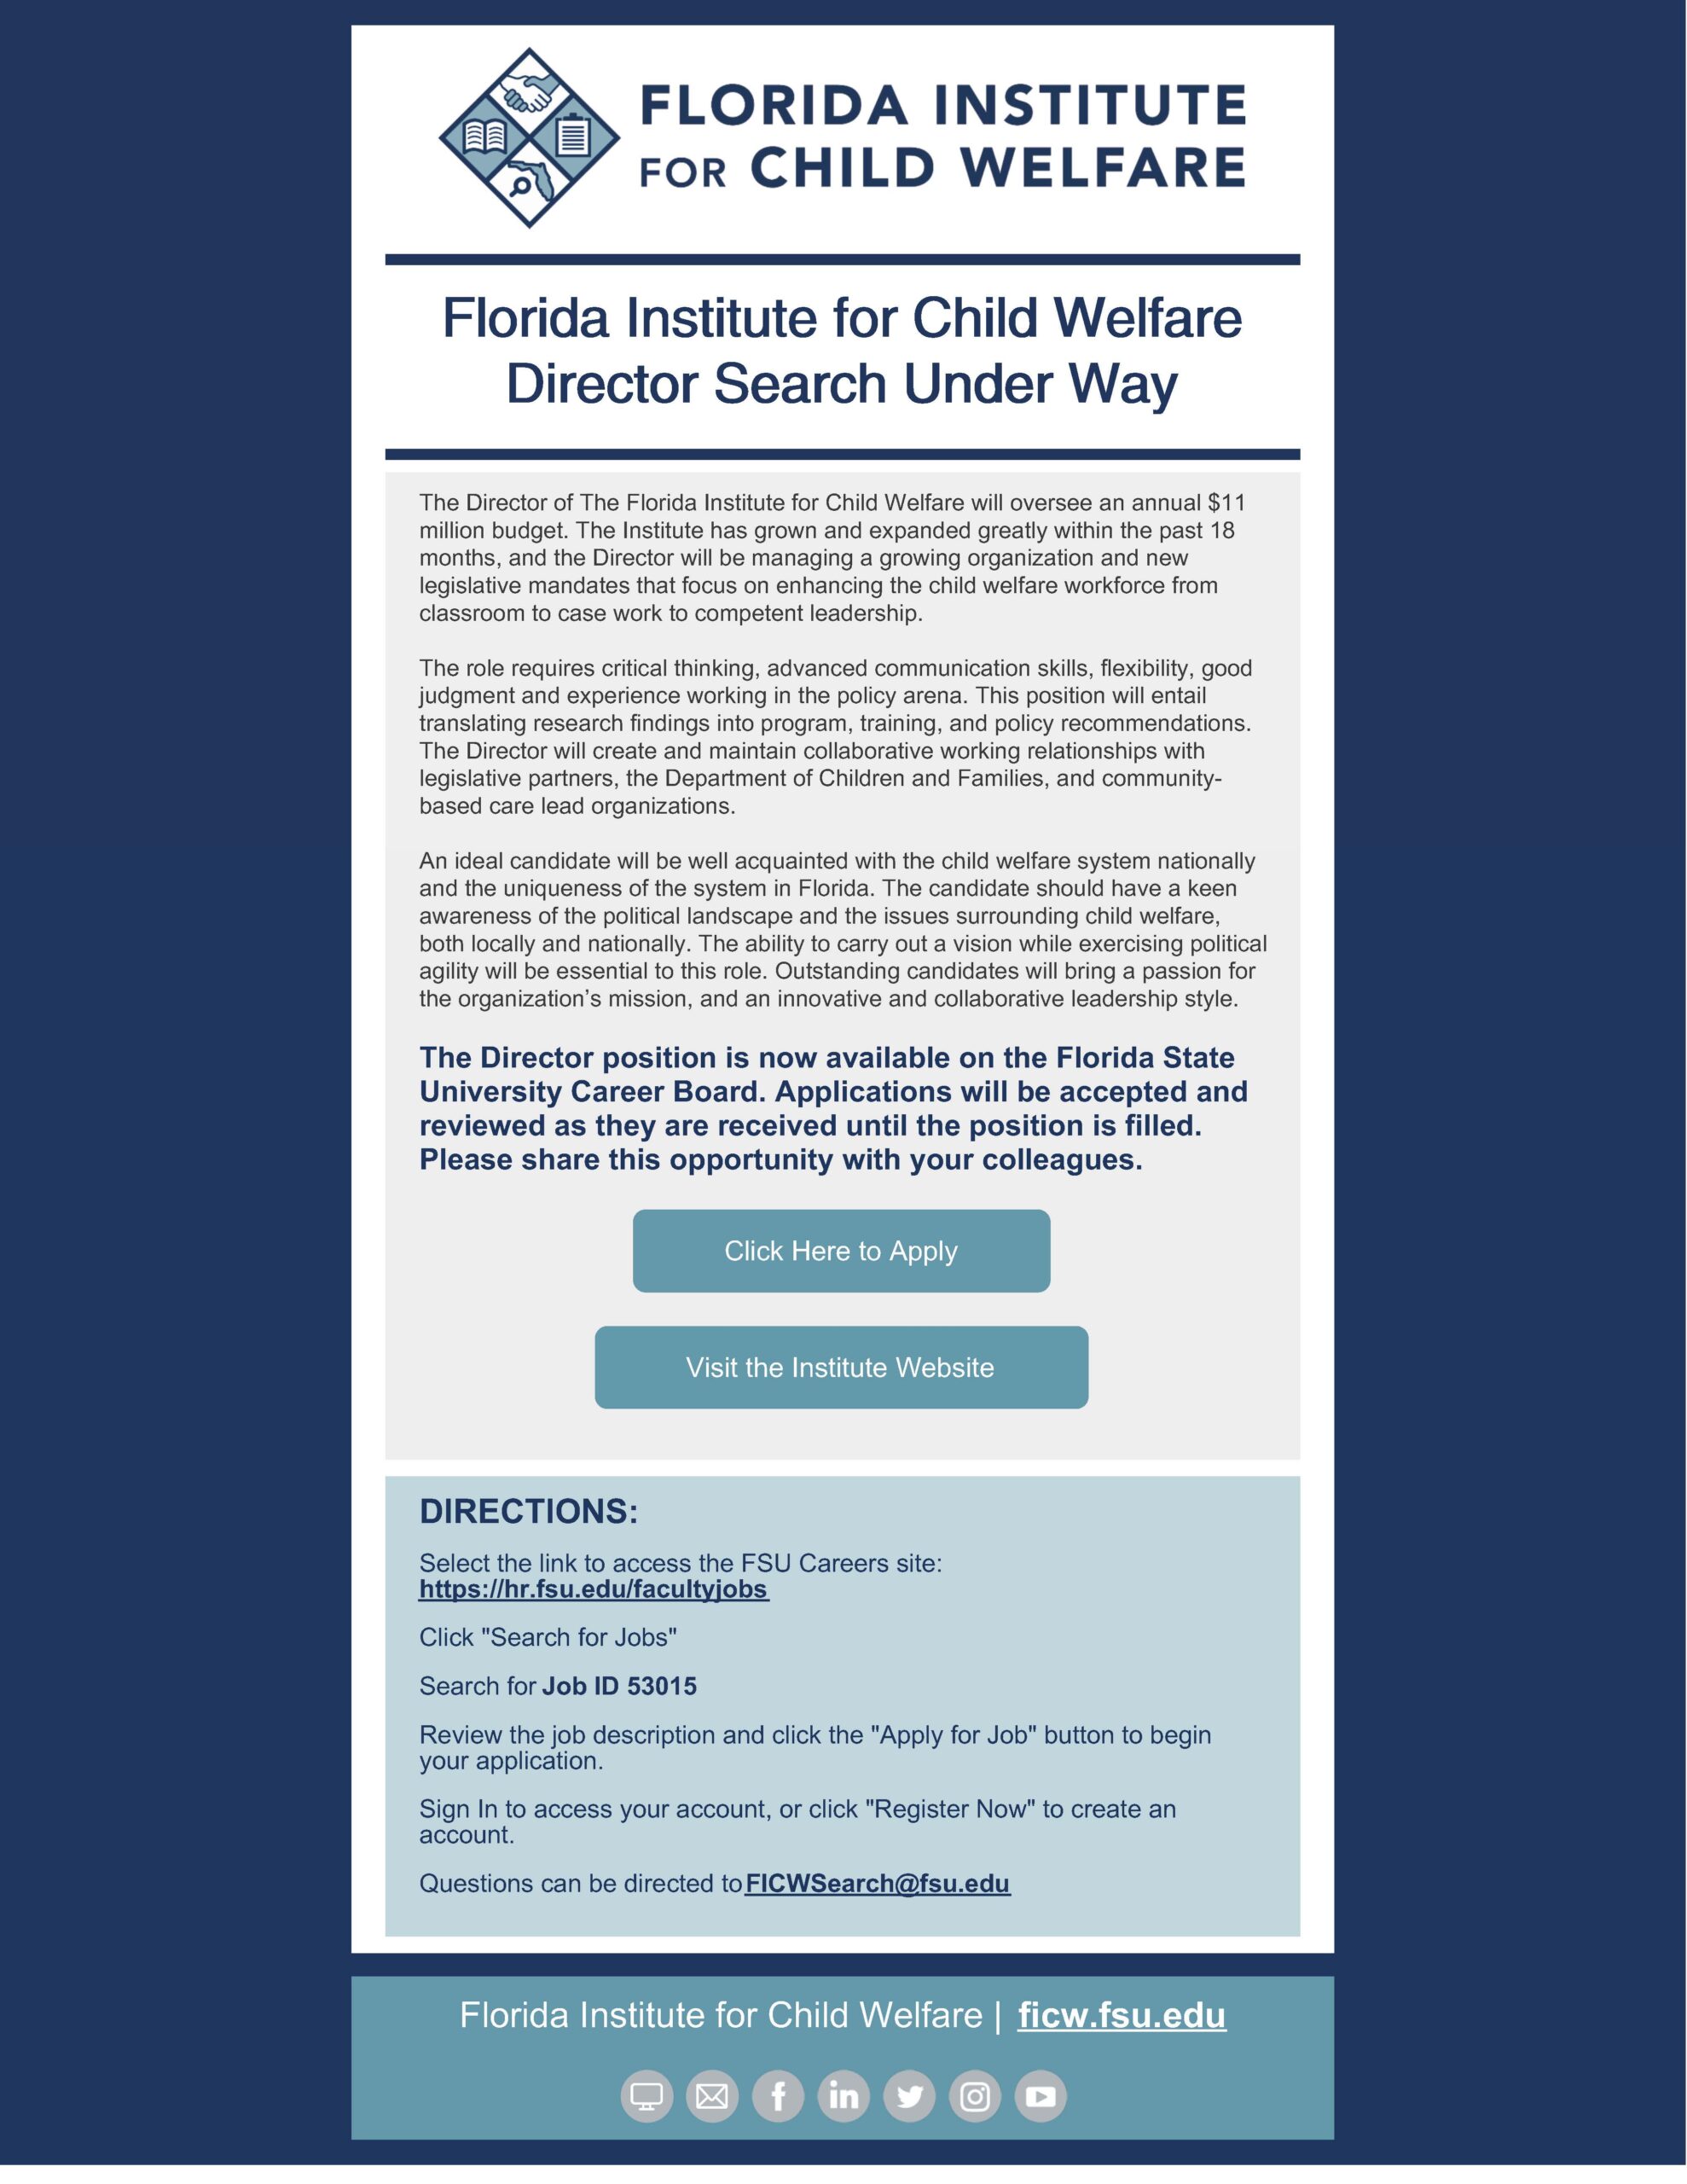 A flyer for Florida Institute of Child Welfare with directions to applying for the director position.